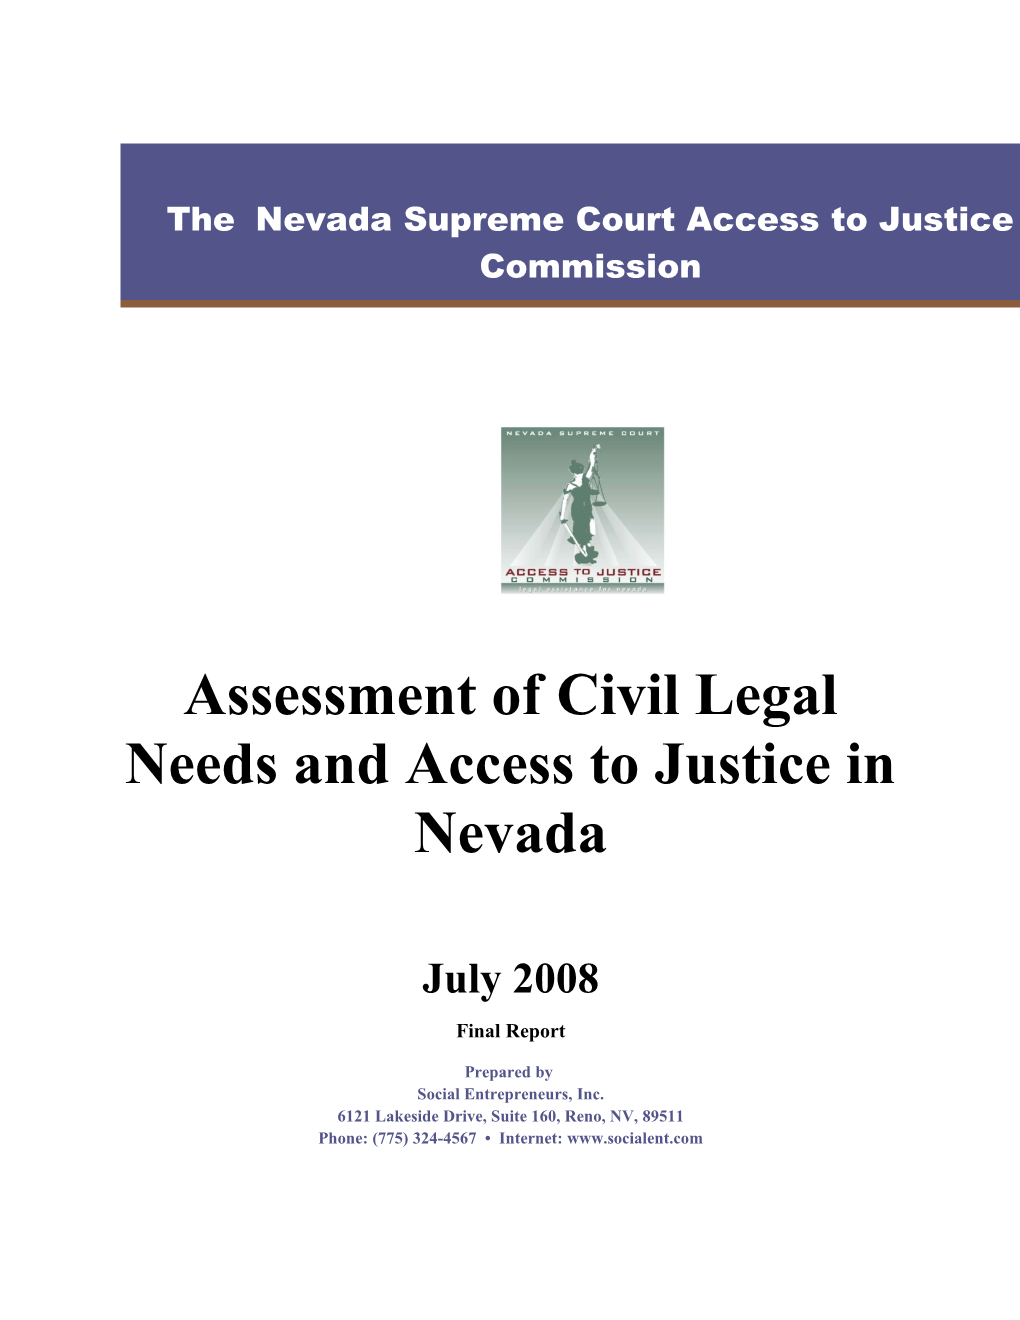 Nevada Supreme Court Access to Justice Commission